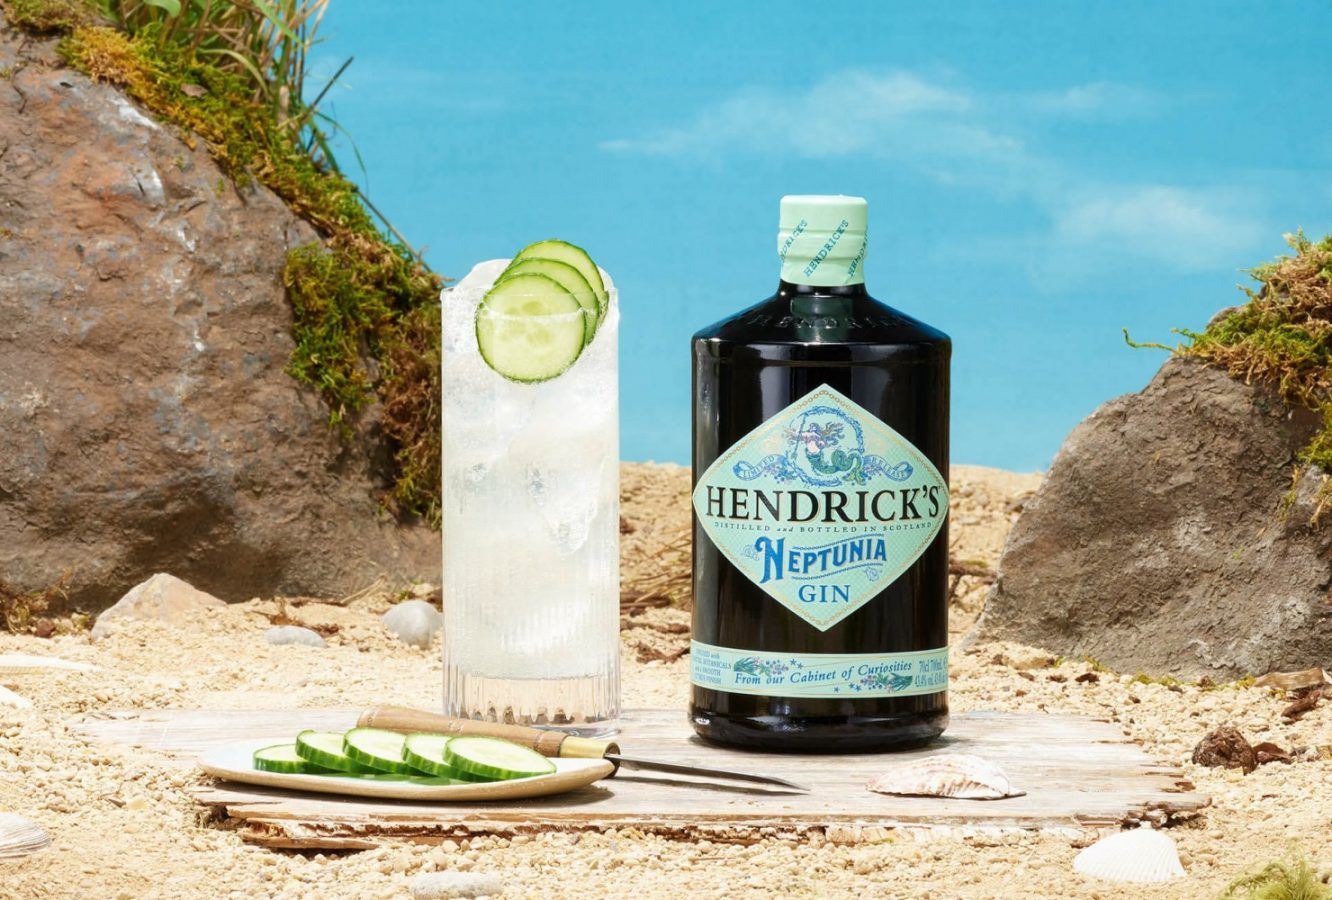 Hendrick’s launches a limited-edition gin inspired by the sea